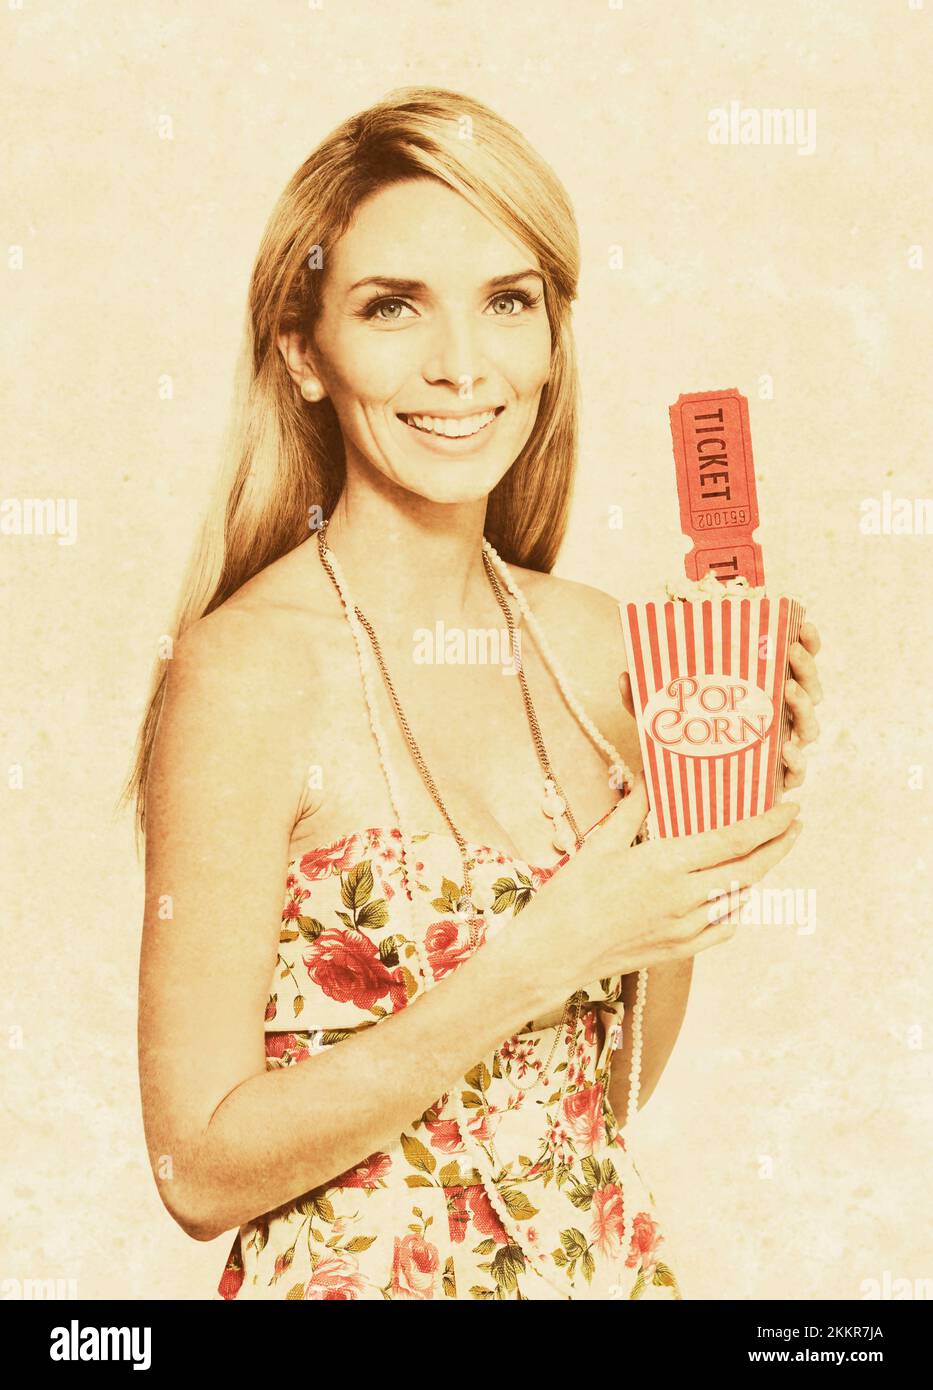 Faded And Textured Image Of A Vintage Woman With Smile, Pop Corn And Movie Tickets In A Olden Day Drive In And Movie Theatre Concept Stock Photo